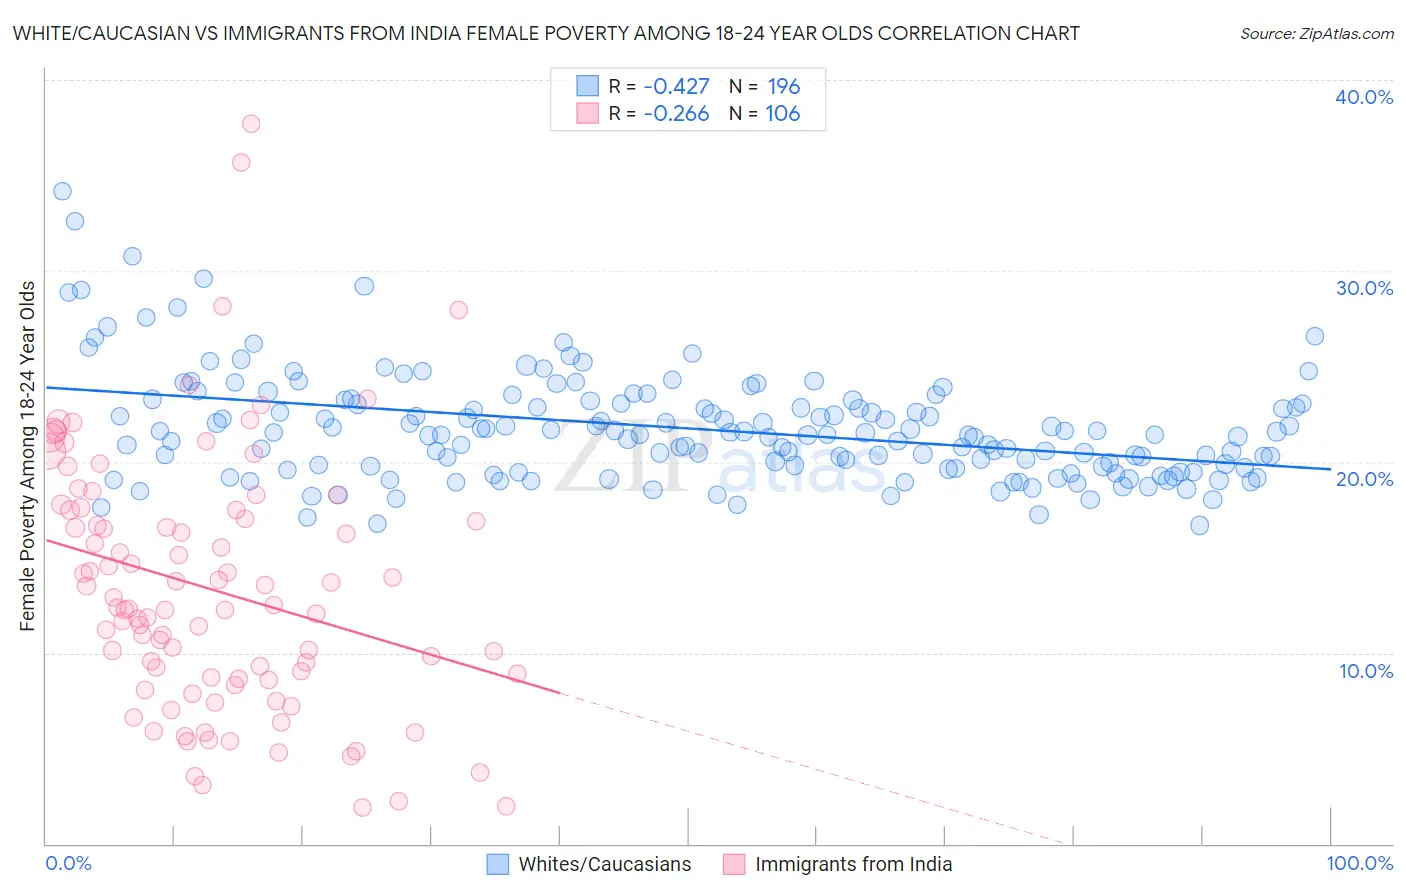 White/Caucasian vs Immigrants from India Female Poverty Among 18-24 Year Olds